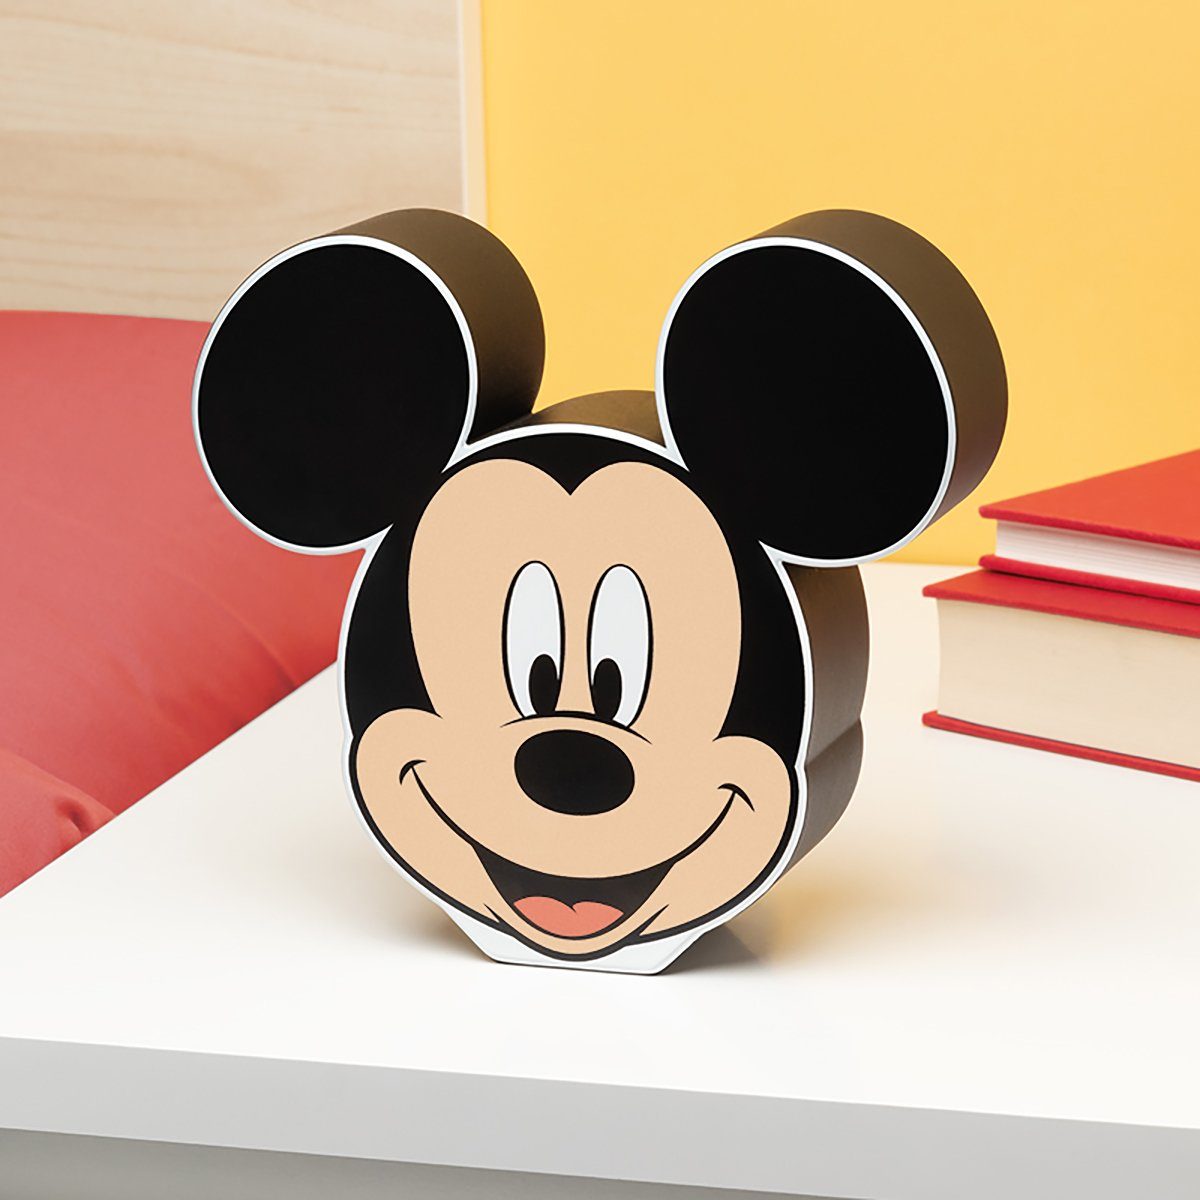 Mouse Leuchte Paladone Stehlampe Disney Mickey